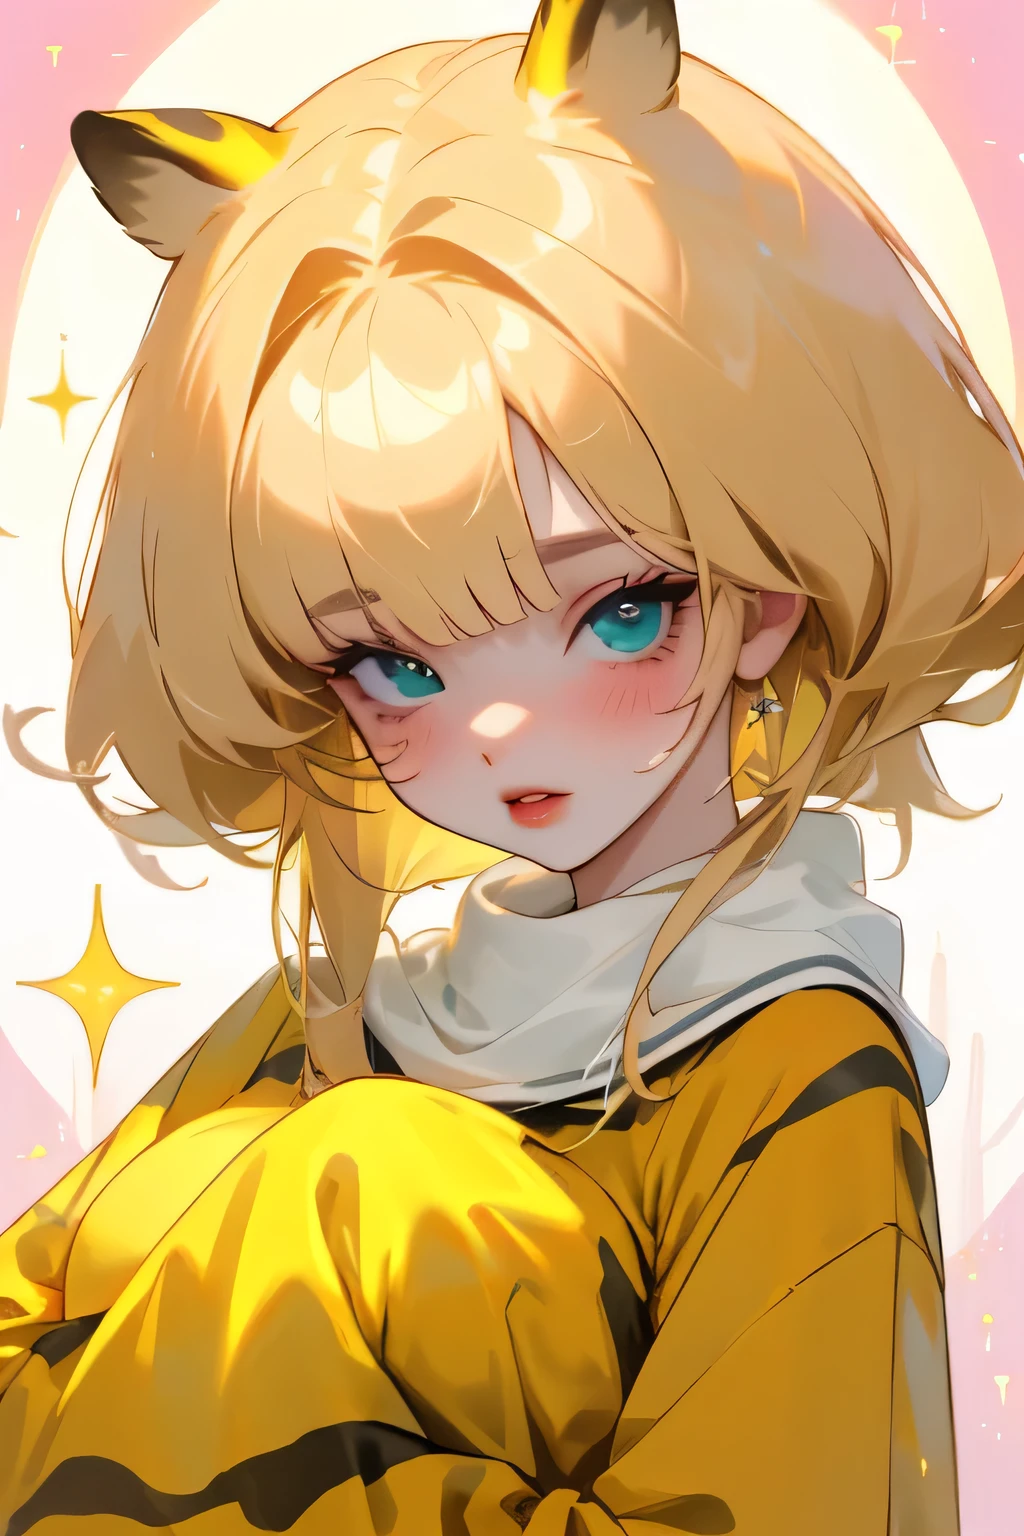 (high quality) (Best Quality) (Una Women) (correct physiognomy) (perfect students) (Perfect eyes) Women, blonde hair with bangs on the forehead, TWO cat ears growing out of his head, eyes with heterochromia dos ojos, one eye green and the other gold, sensitive lips, female appearance, soft facial features, thin eyebrows, soft skin, rosy cheeks, pink lips, silky eyelashes, dreamy expression, middle age, youth clothing, glitter sweatshirt, tiger print, photo illuminated by sunlight, Women en un campo de girasoles